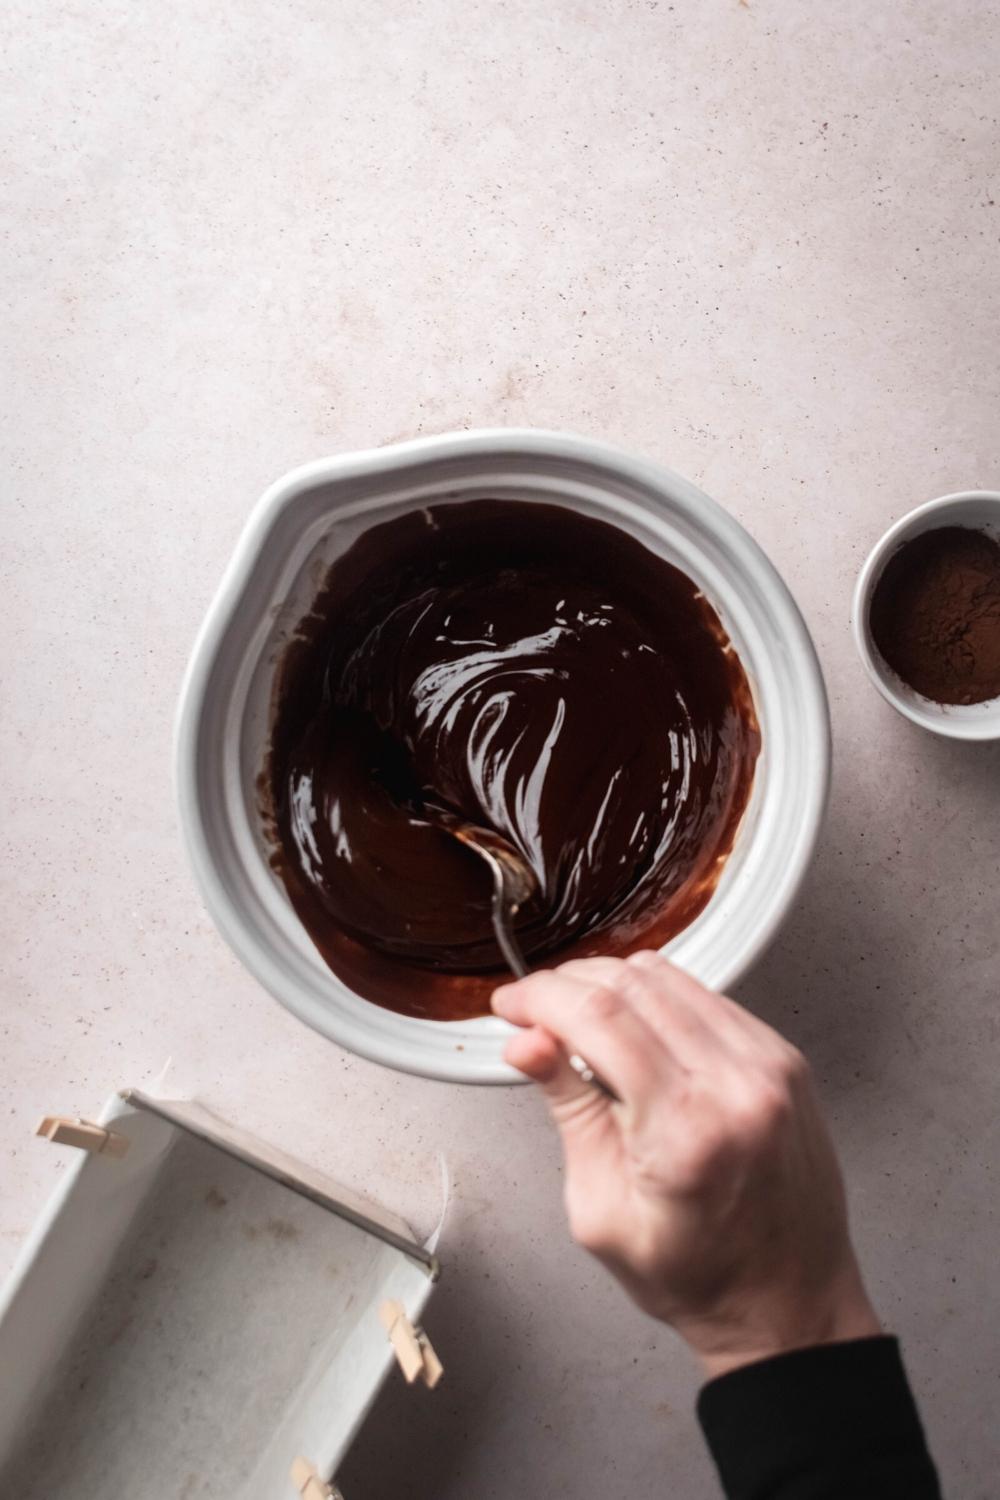 A white bowl filled with melted chocolate with a hand holding a spoon mixing the chocolate.